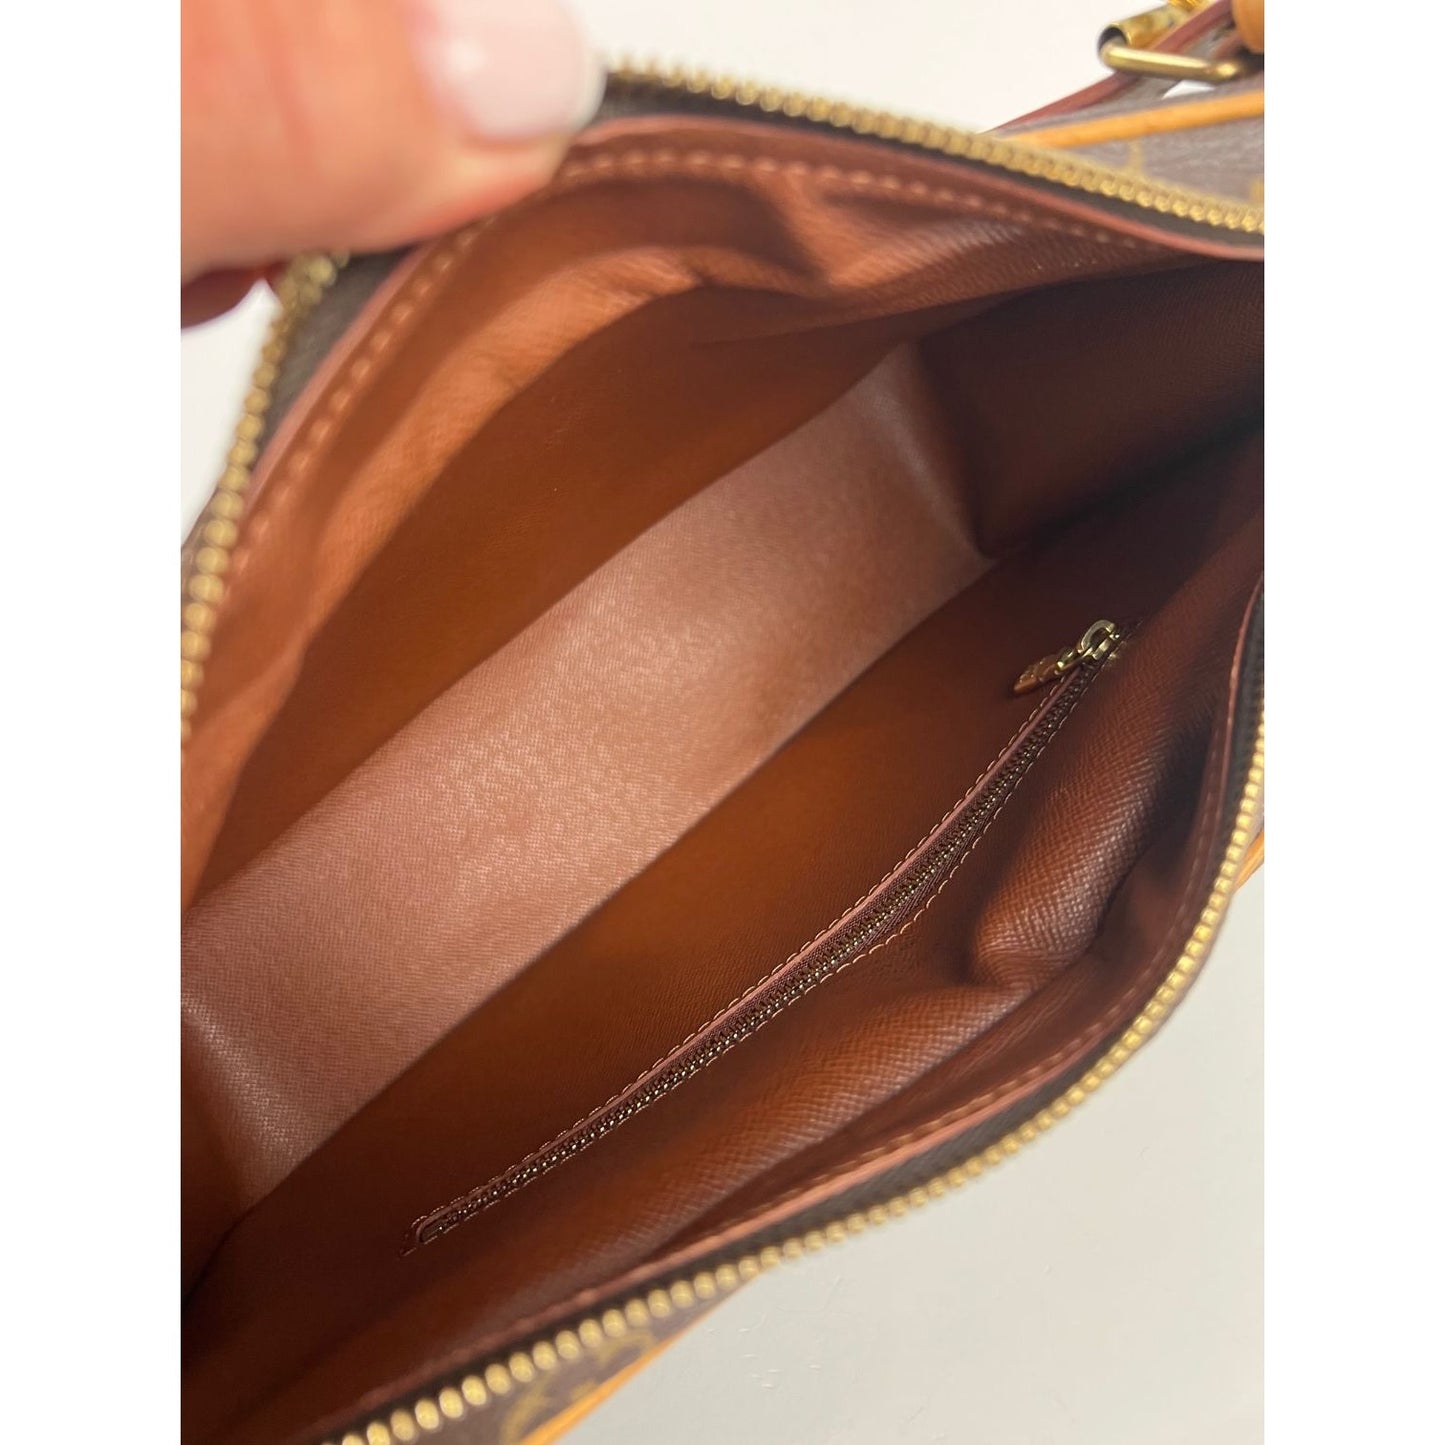 Opinions/reviews of the Boulogne? : r/Louisvuitton